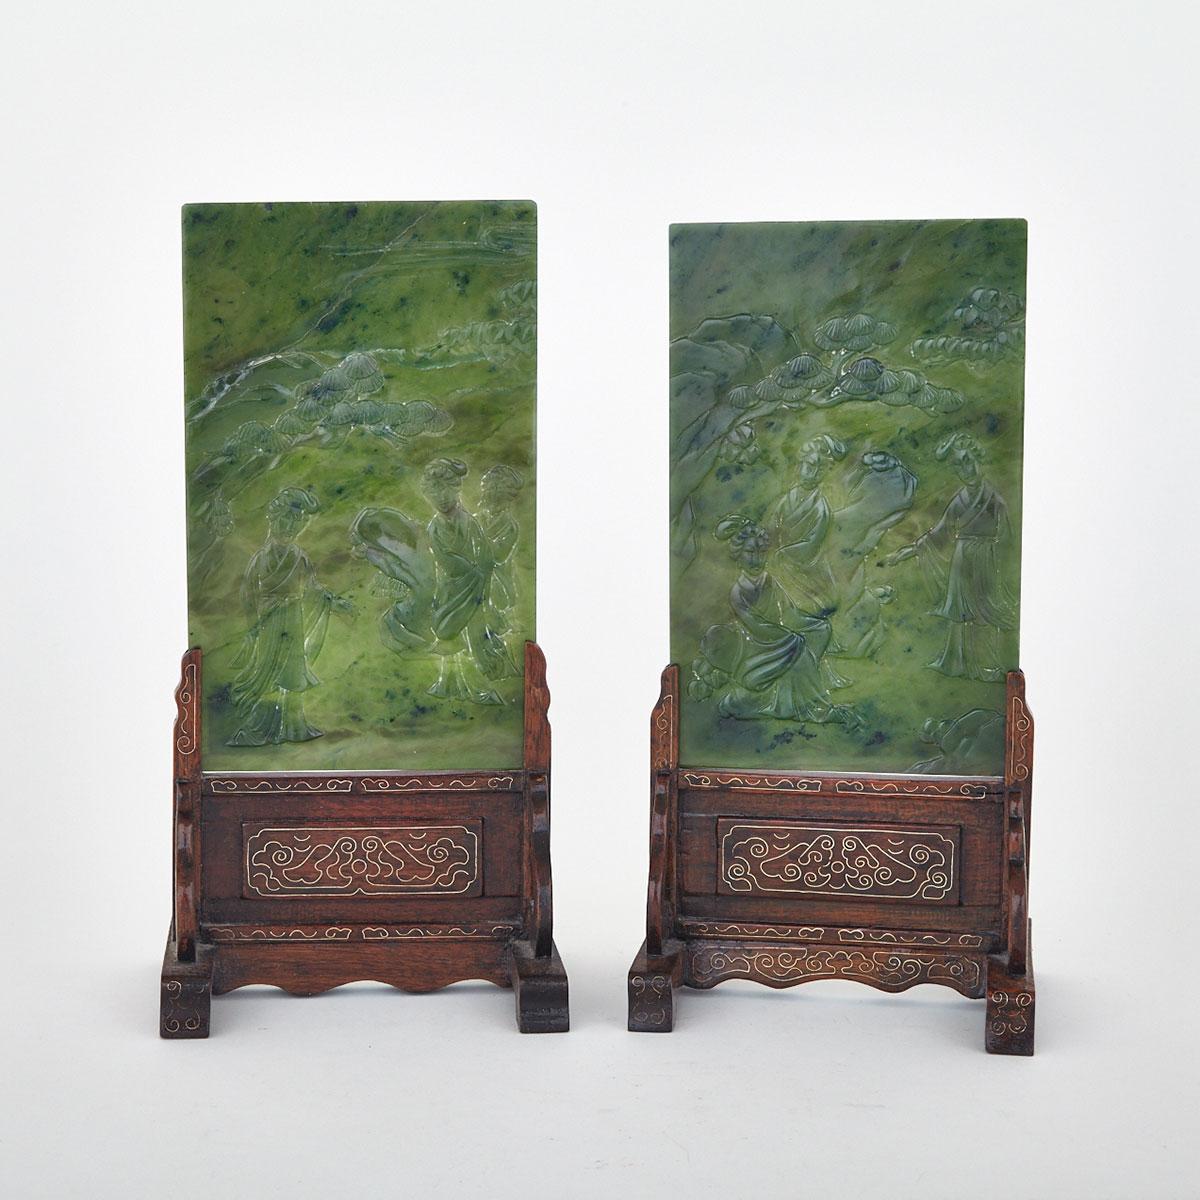 Pair of Spinach Green Jade Table Screens